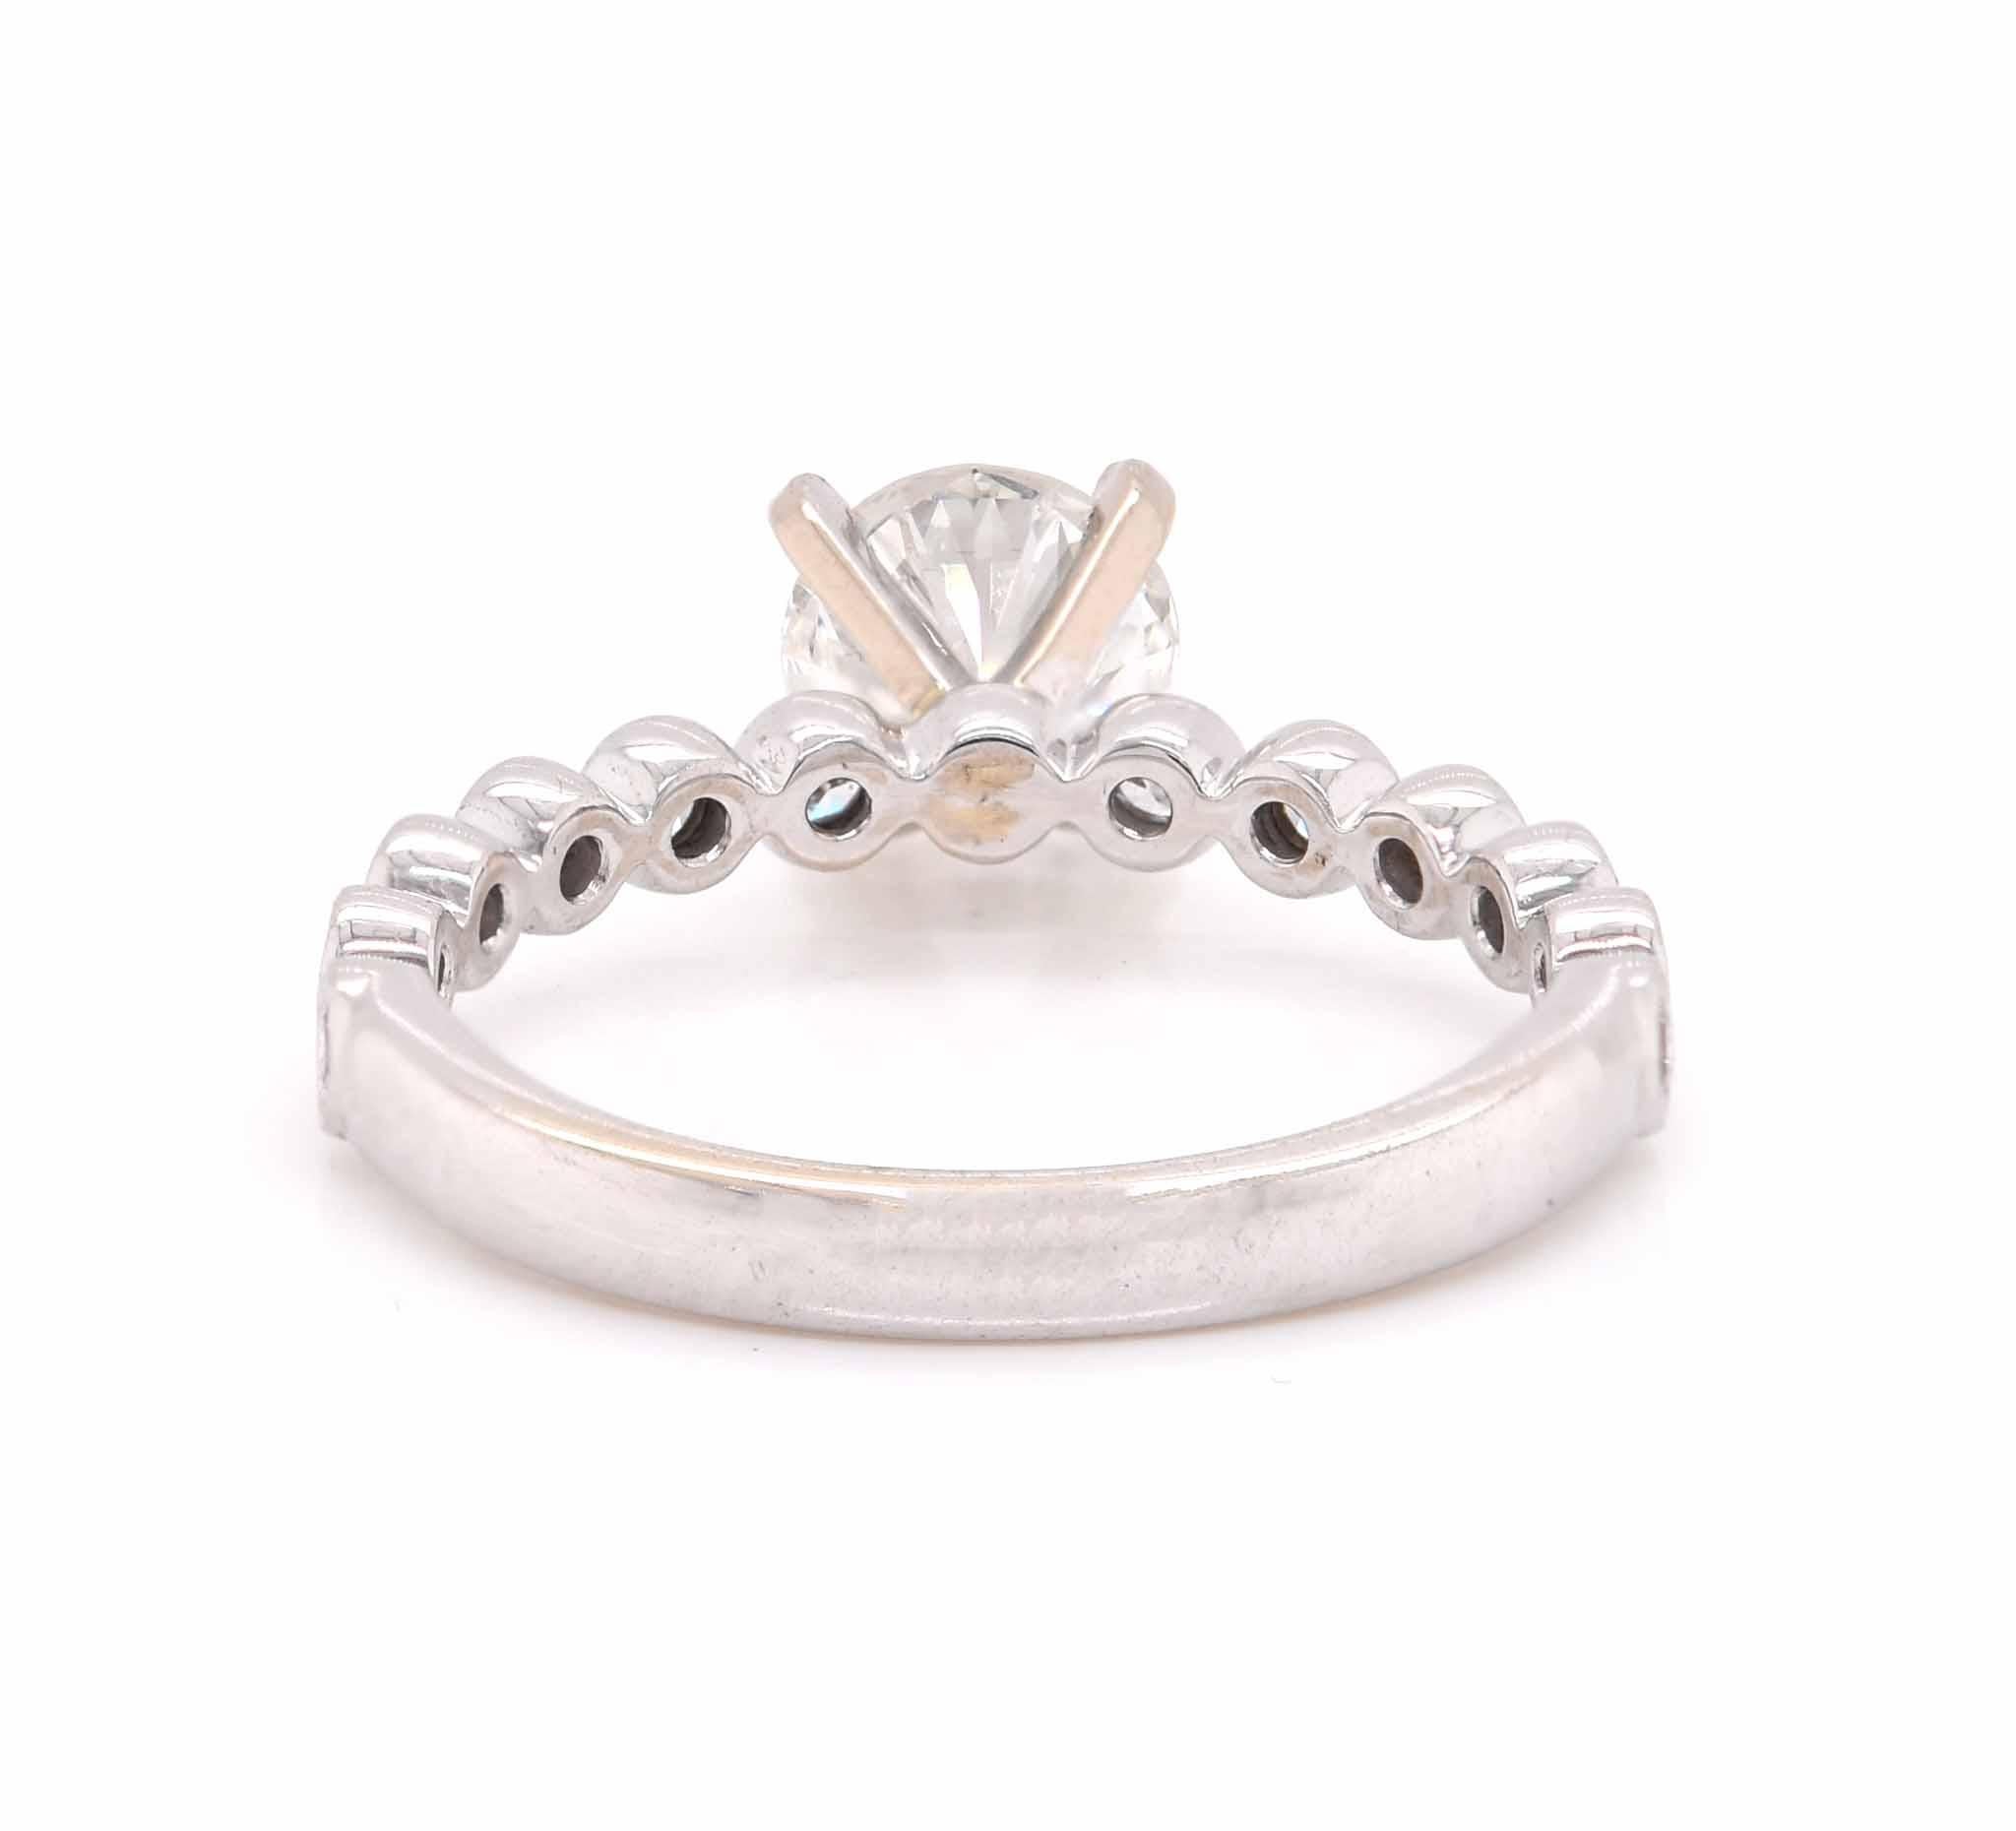 14 Karat White Gold Diamond Engagement Ring In Excellent Condition For Sale In Scottsdale, AZ